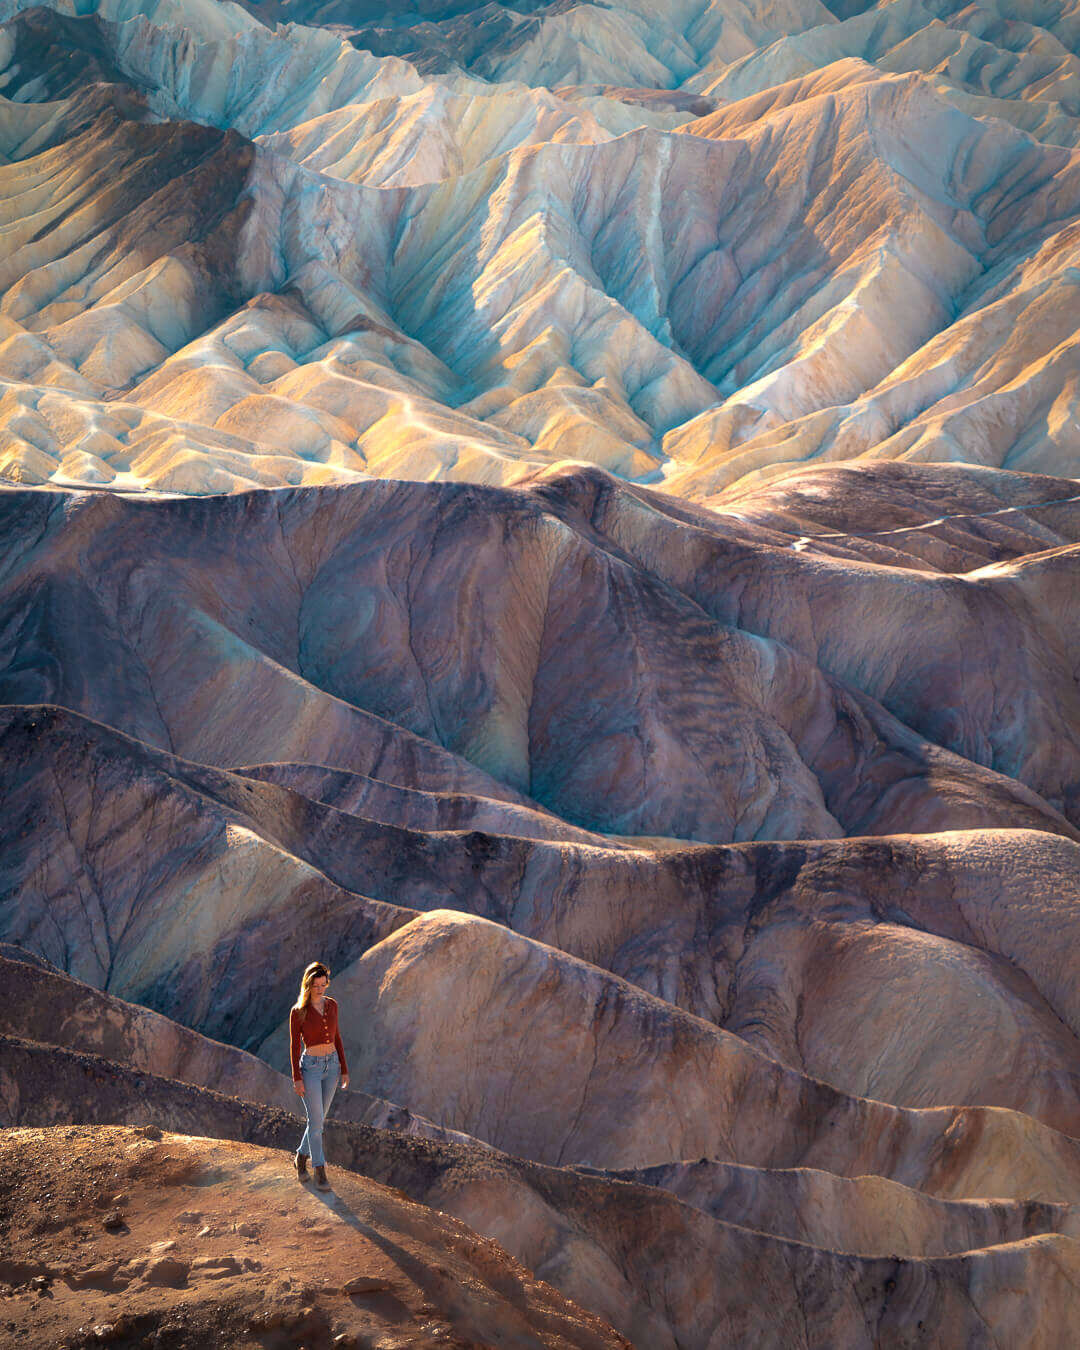 Death Valley is a fantastic place to visit in early spring, before the temperatures soar into the triple digits.The stunning views at Zabriskie Point are some of the most photographed in Death Valley National Park.